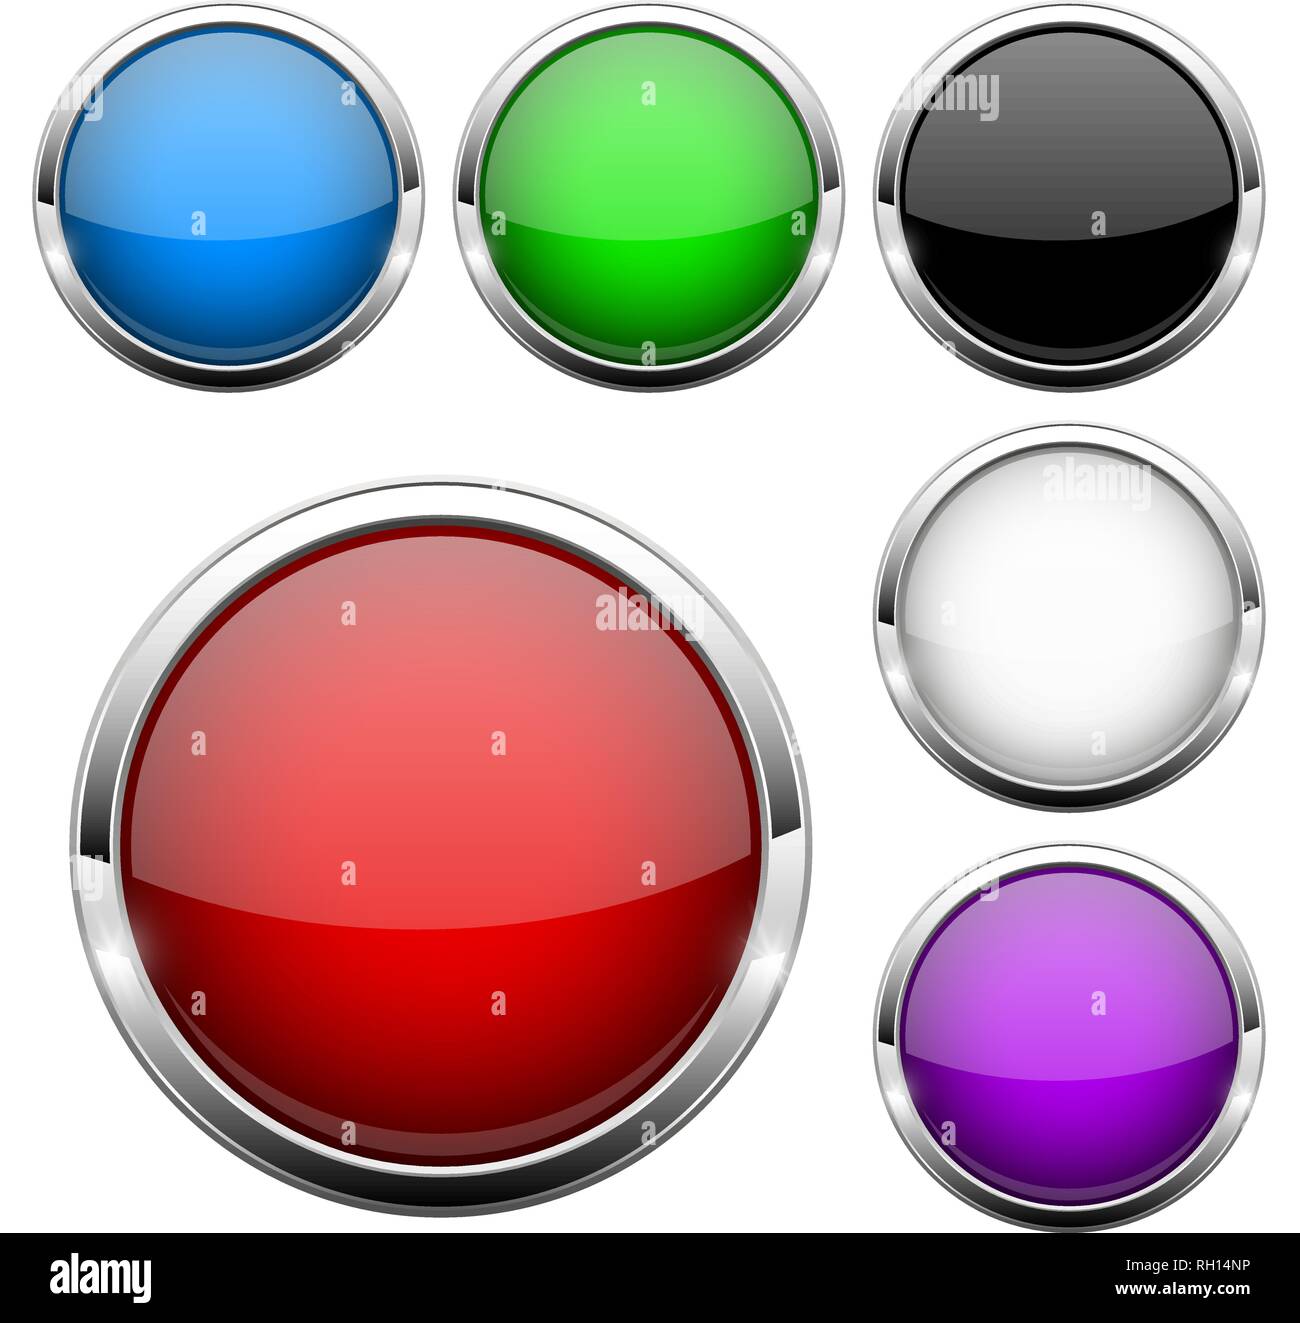 Glass Buttons Set Shiny Round Colored 3d Web Icons Stock Vector Image